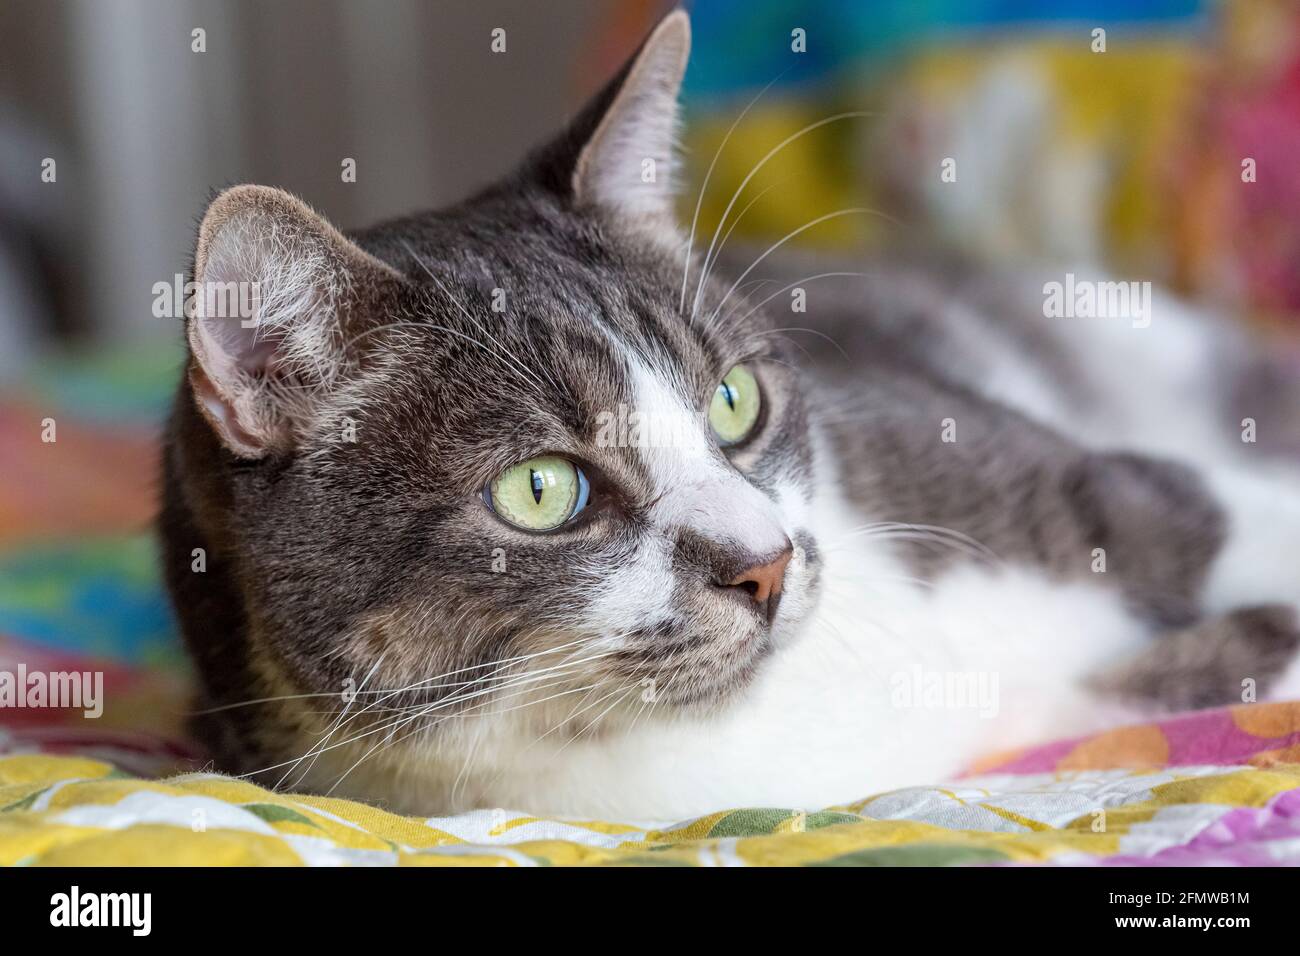 Domestic Shorthair, striped grey and white tabby cat. Stock Photo